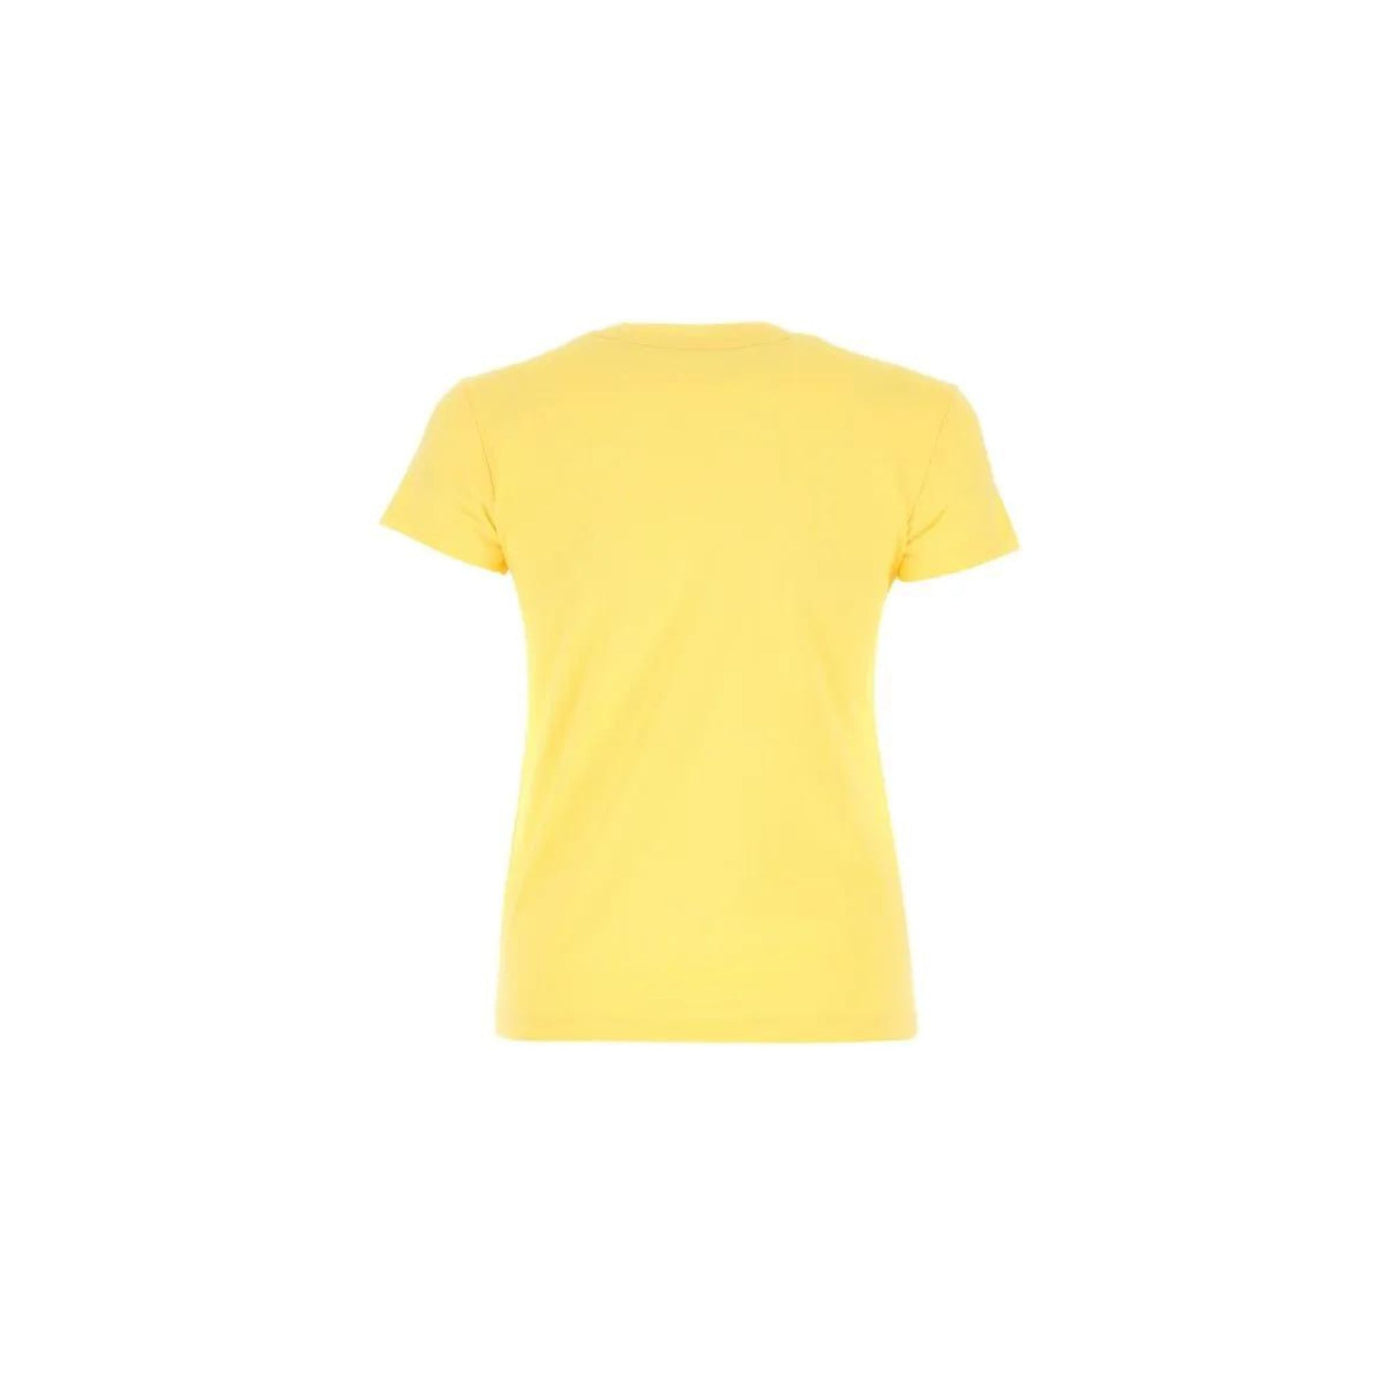 Women's round-neck solid color T-shirt